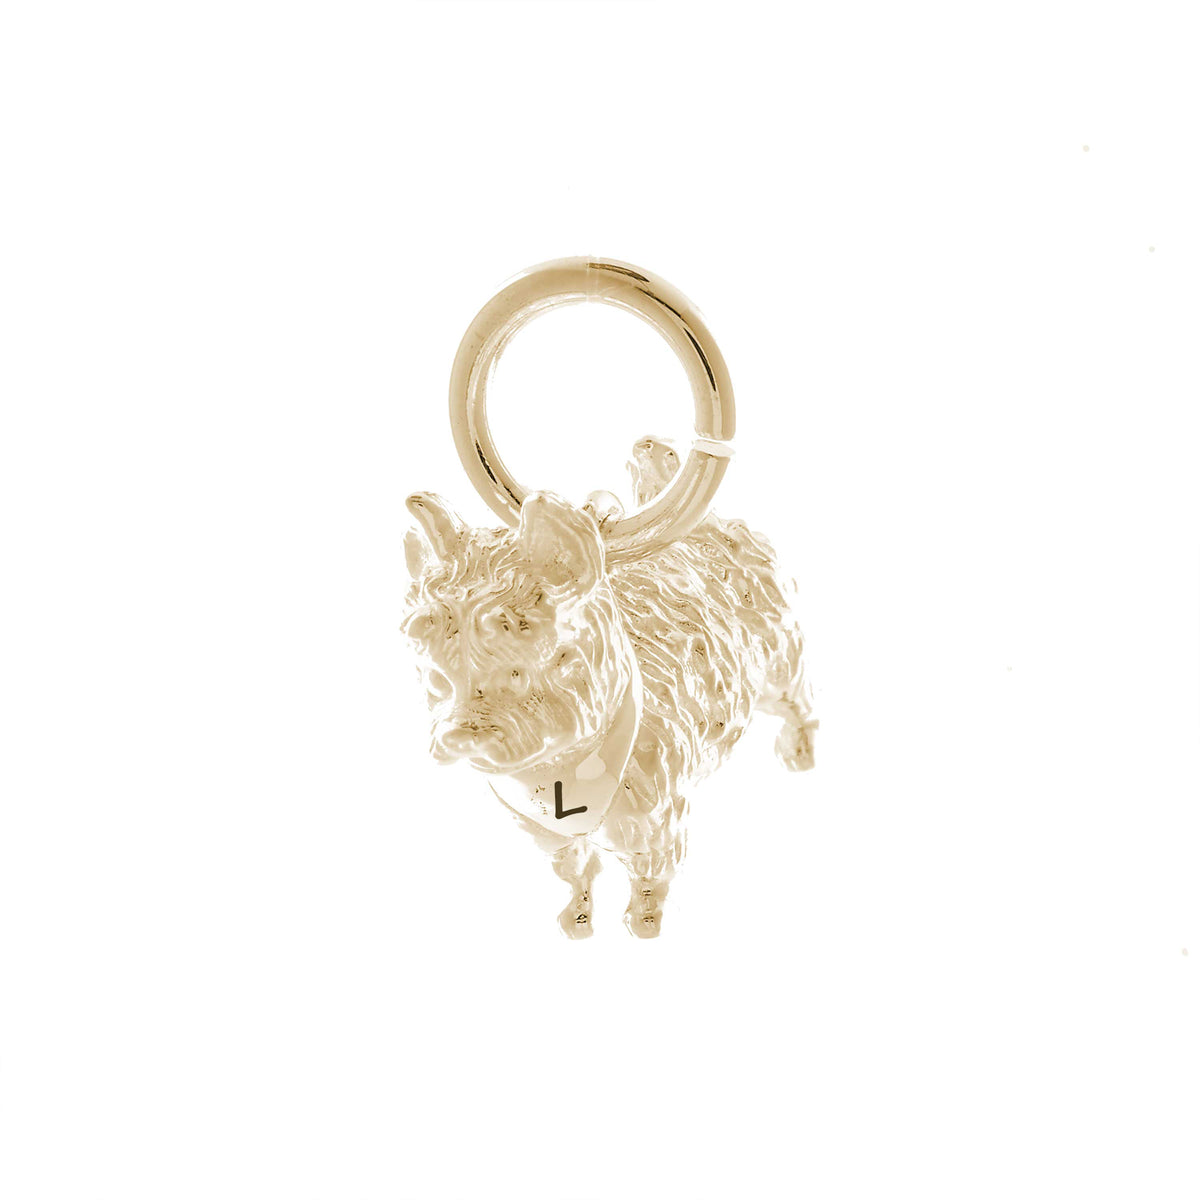 westie west highland terrier solid gold dog charm for necklace or bracelet scarlett jewellery